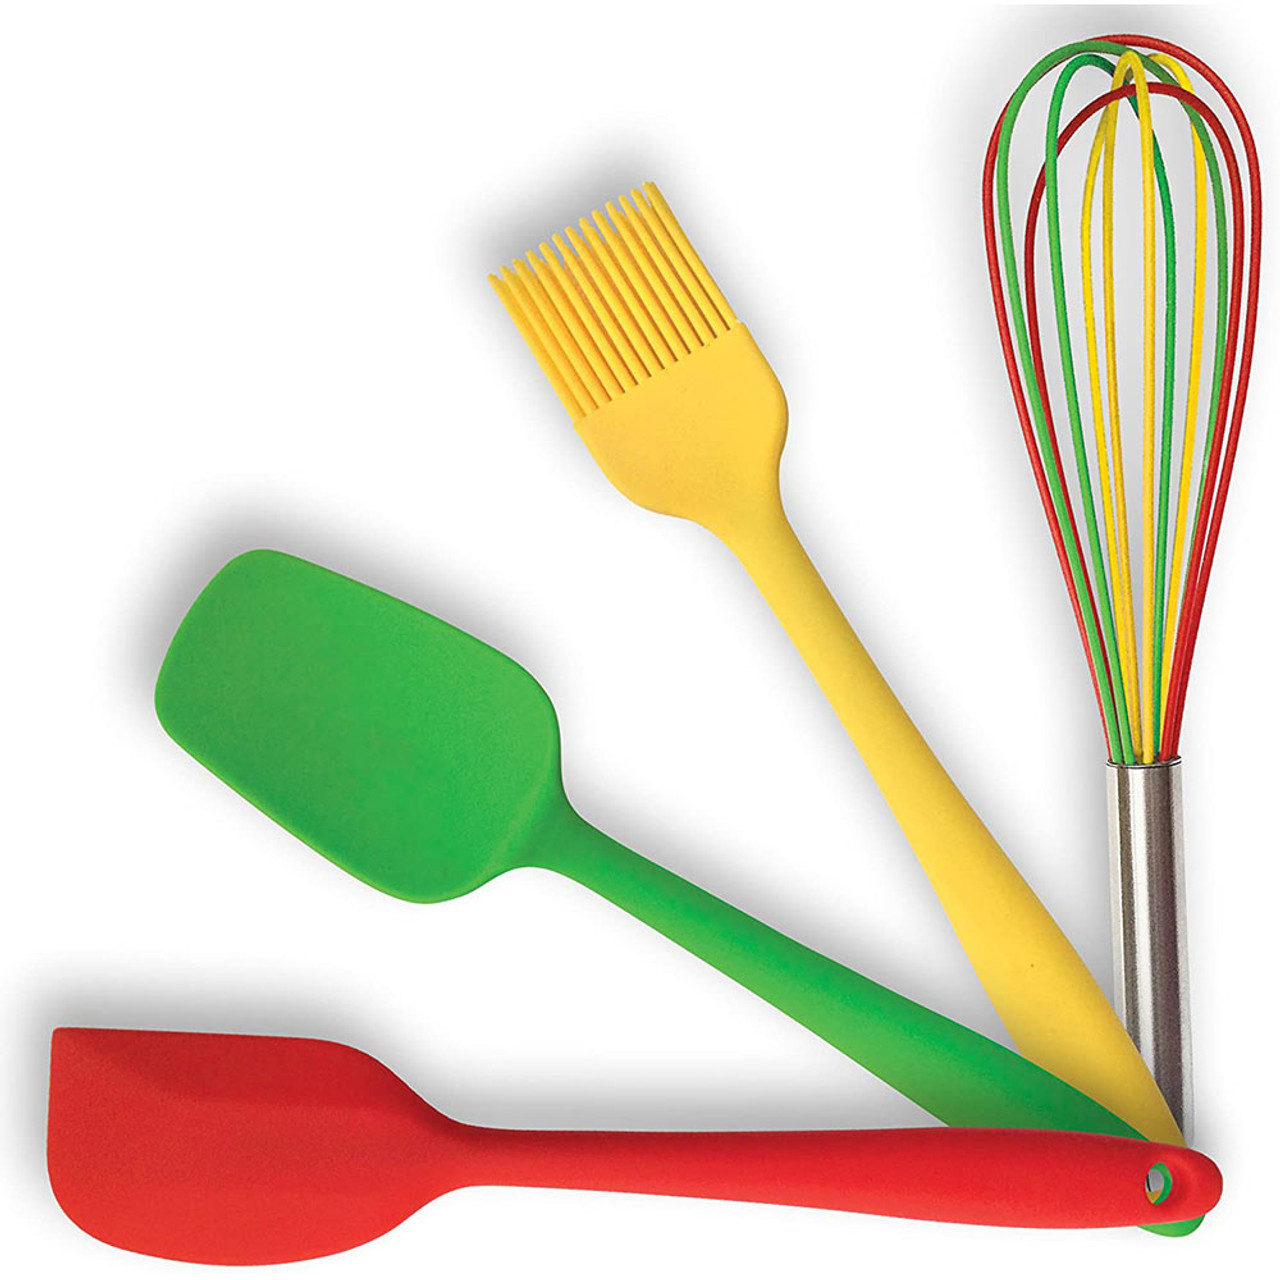 Cooking Silicone Kitchen Utensils Set (2-Pack) product image